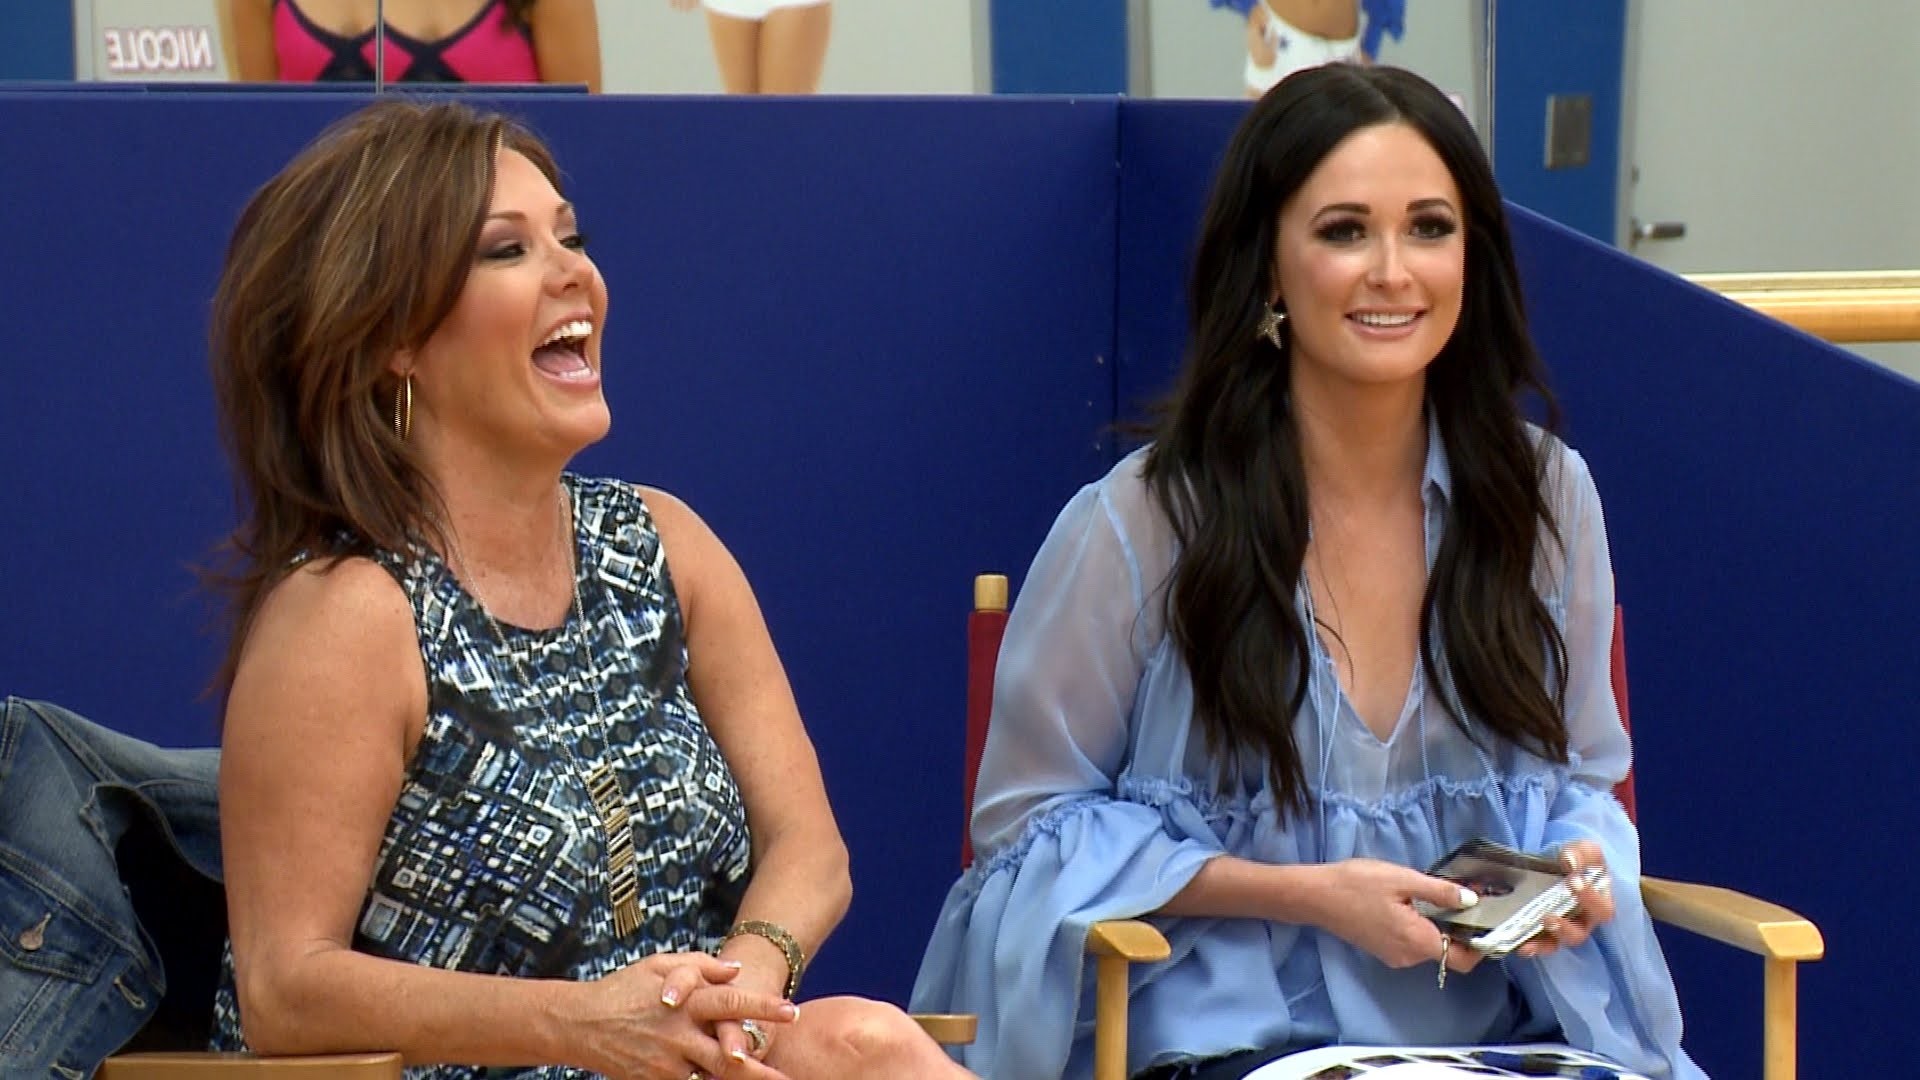 1920x1080 Kacey Musgraves Is This Week's Special Guest on Dallas Cowboys Cheerleaders:  Making the Team - YouTube